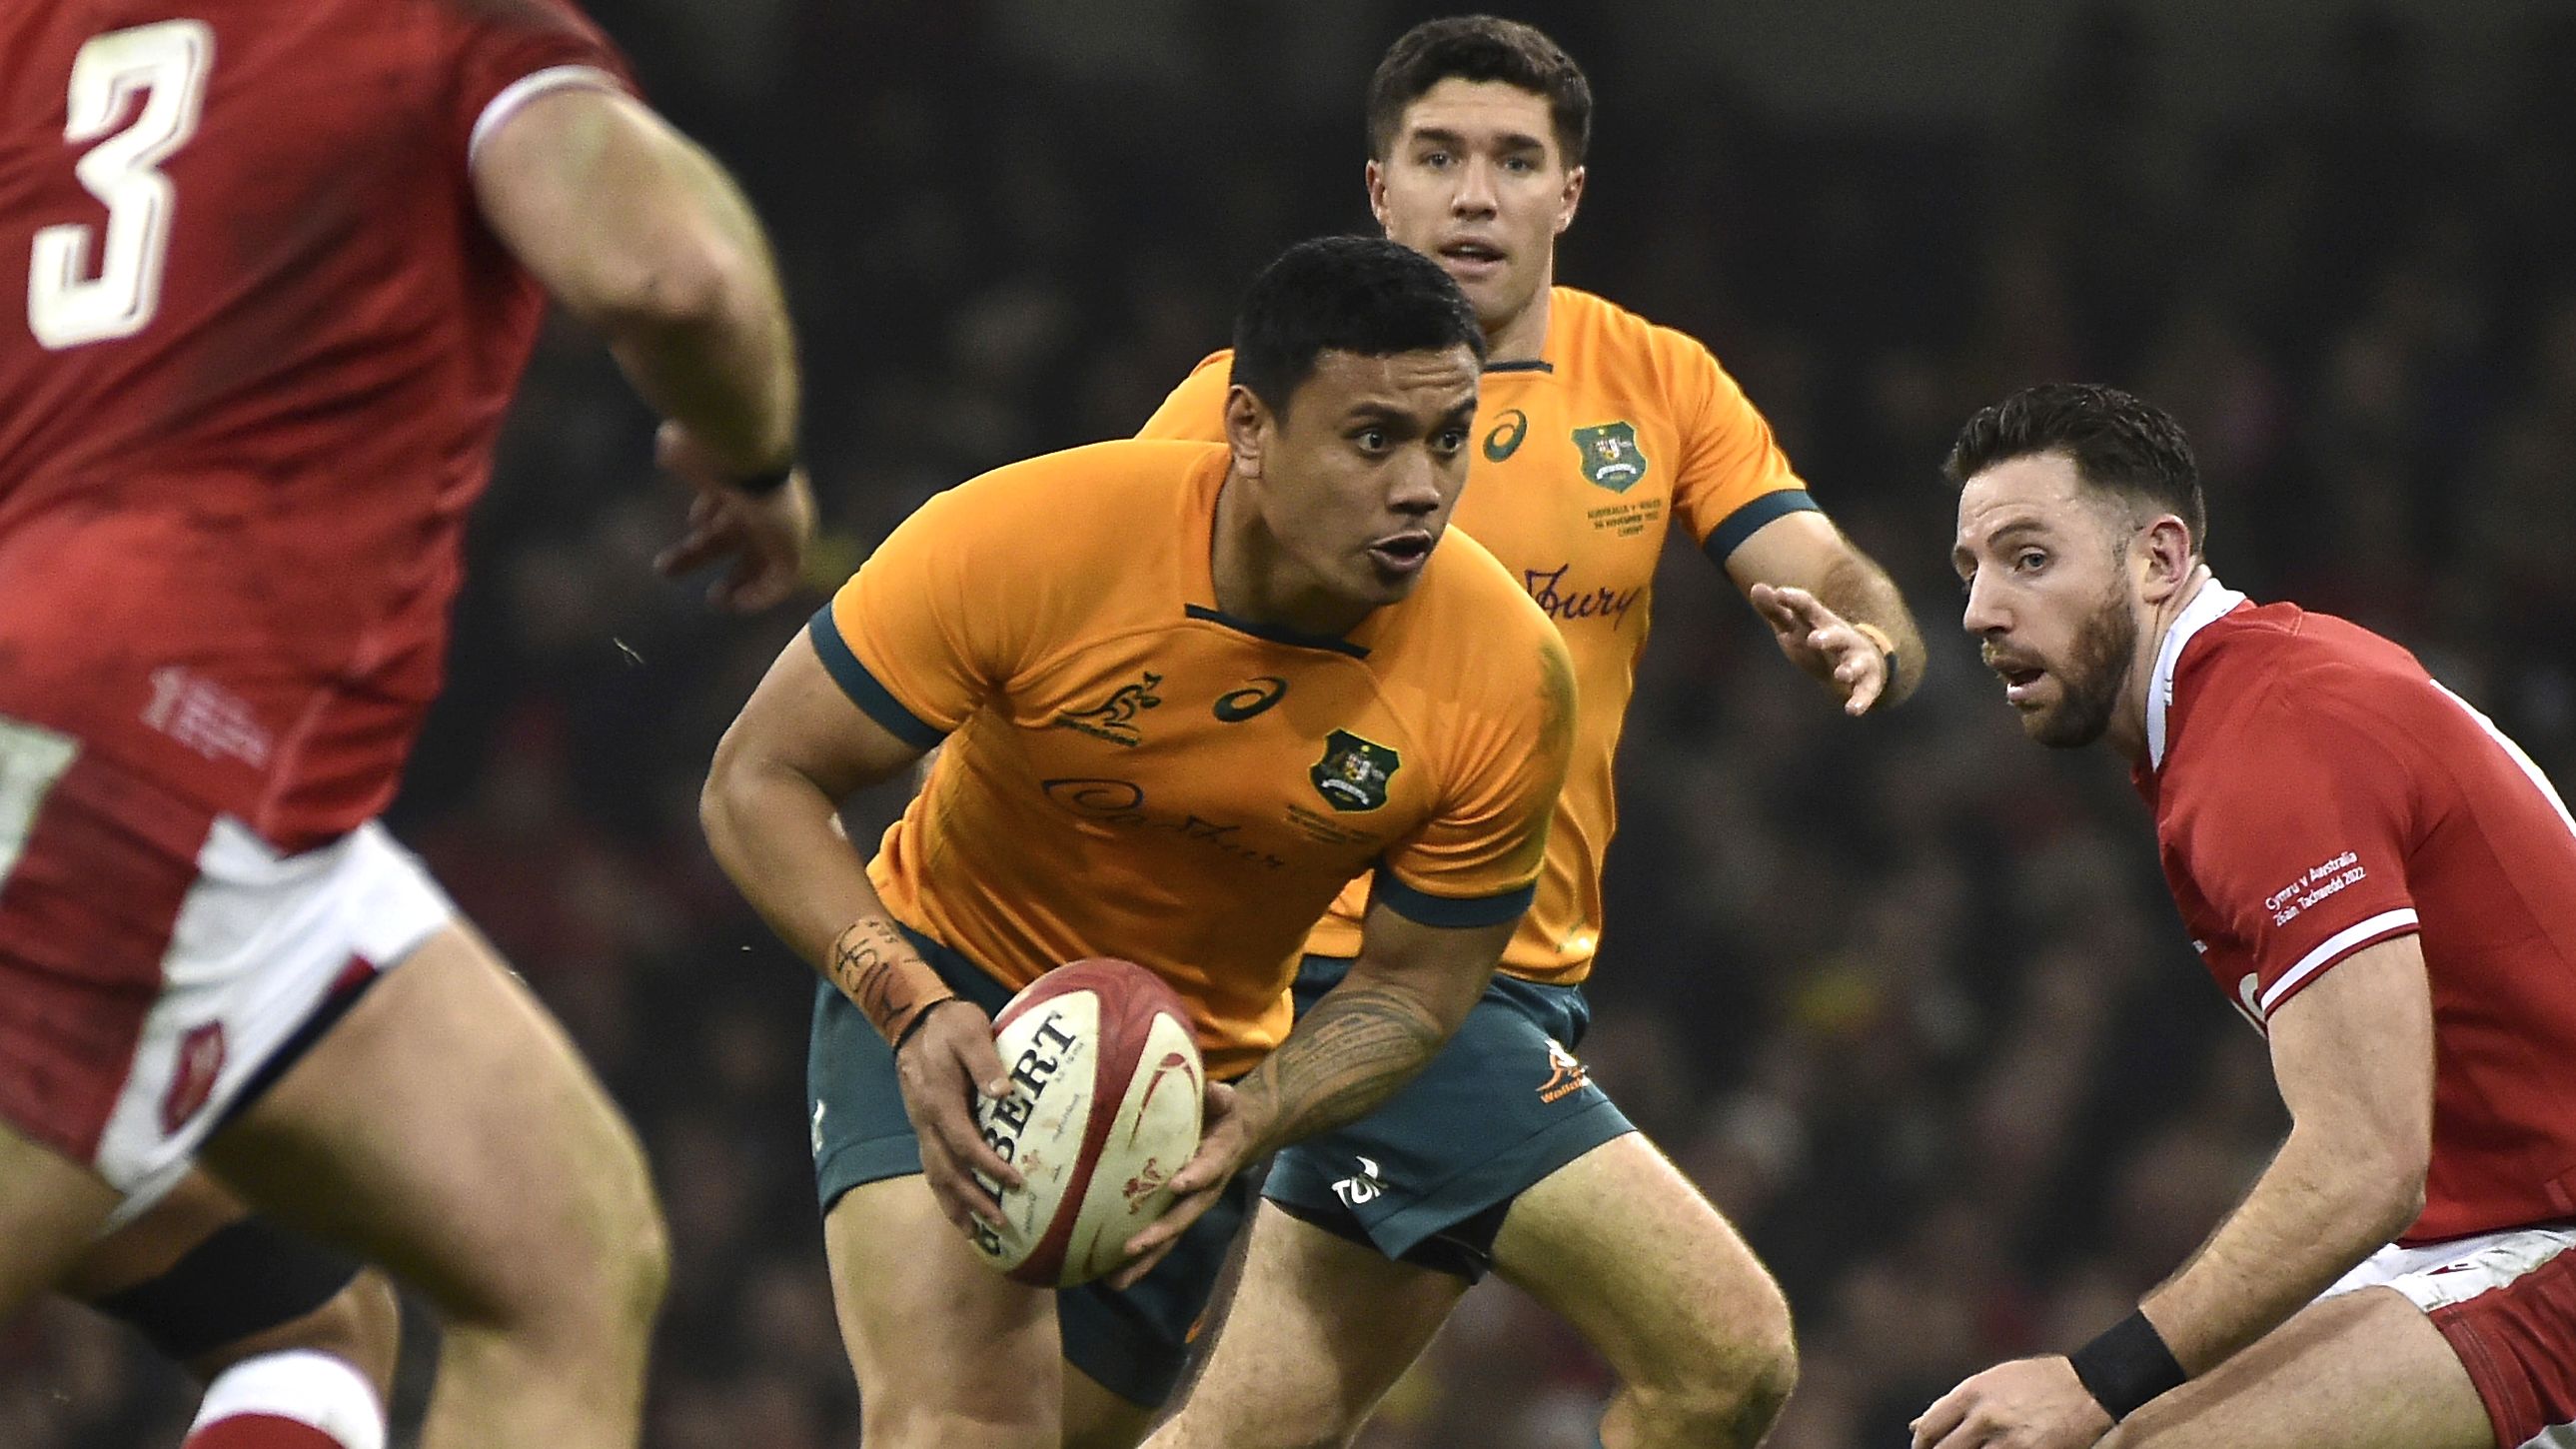 Len Ikitau, centre, runs with the ball during the rugby union international match between Wales and Australia 